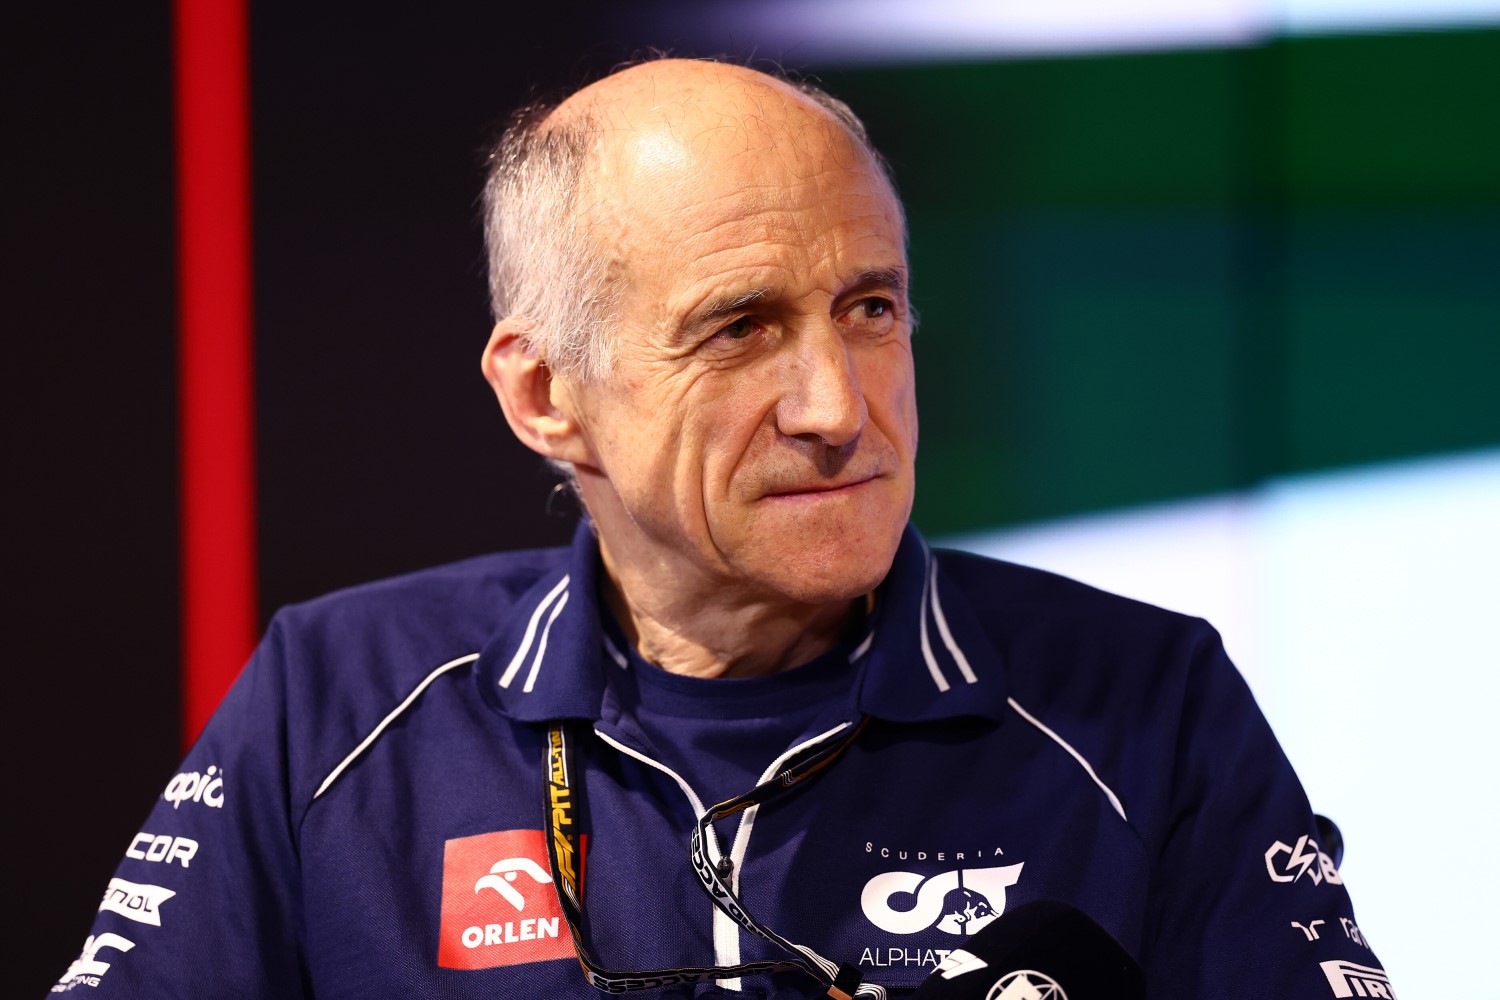 Scuderia AlphaTauri Team Principal Franz Tost attends the Team Principals Press Conference during practice ahead of the F1 Grand Prix of Saudi Arabia at Jeddah Corniche Circuit on March 17, 2023 in Jeddah, Saudi Arabia. (Photo by Bryn Lennon/Getty Images) // Getty Images / Red Bull Content Pool